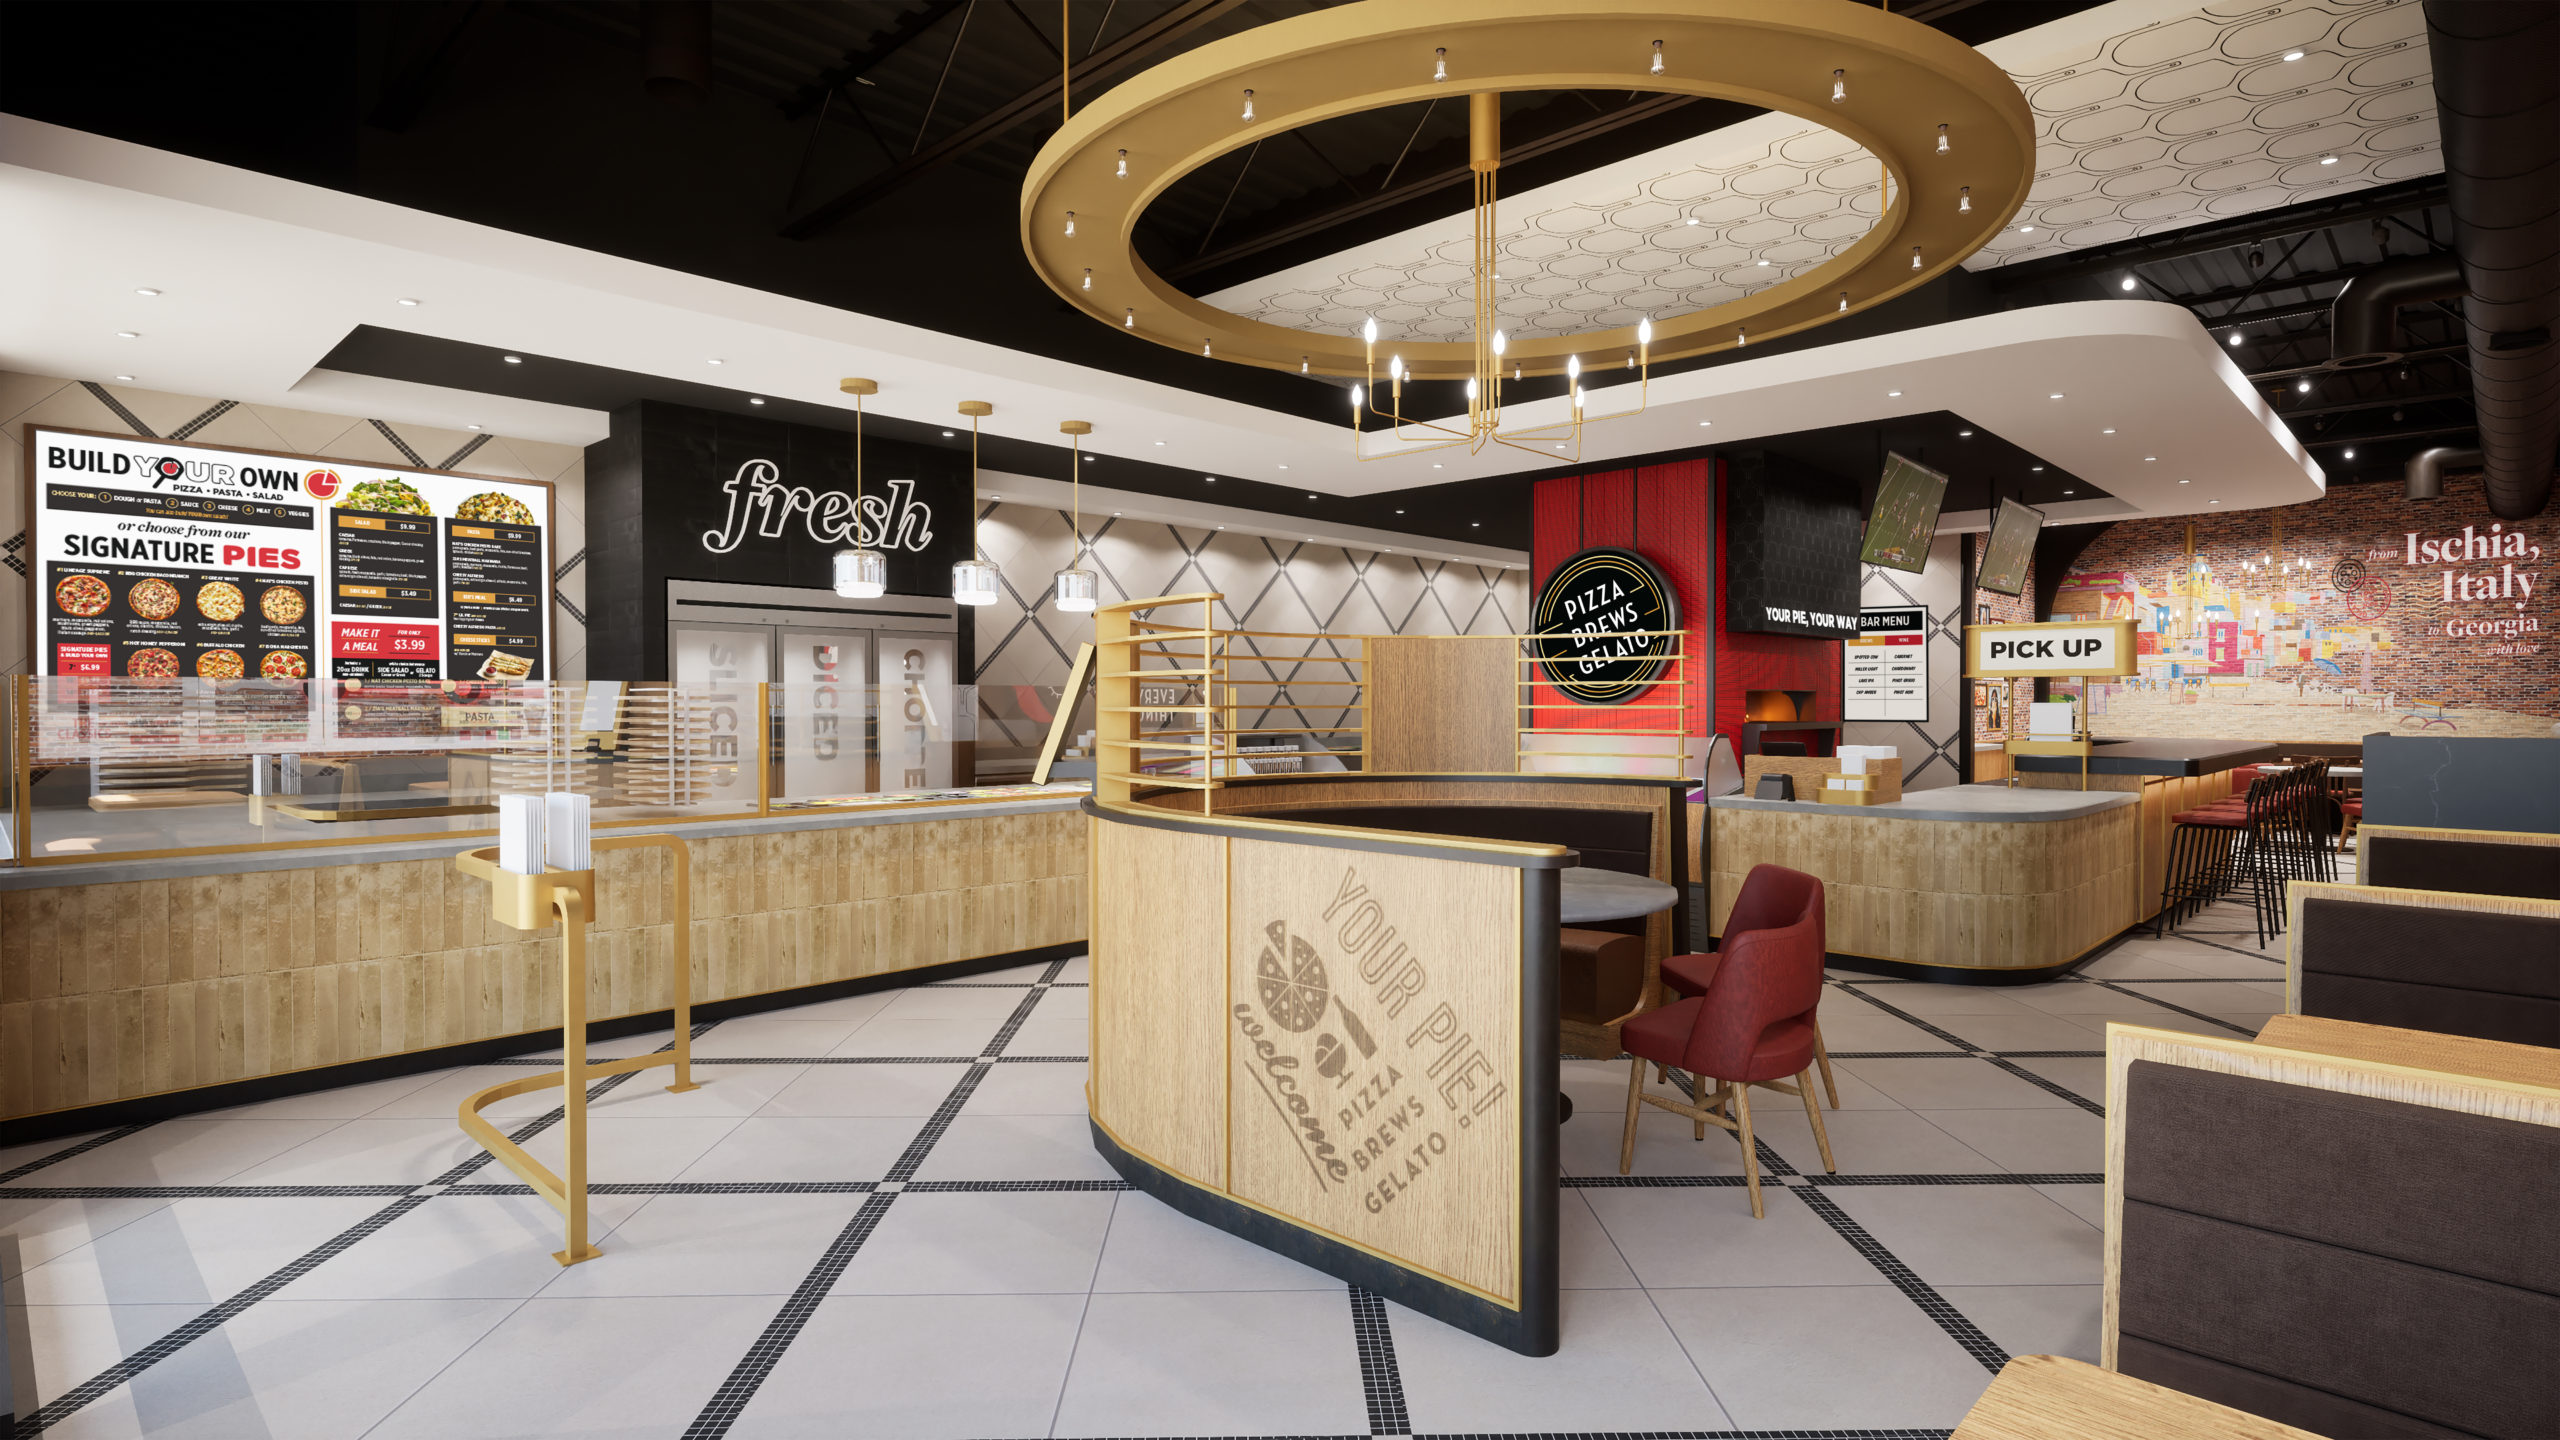 Interior of Your Pie Pizza Franchises For Sale